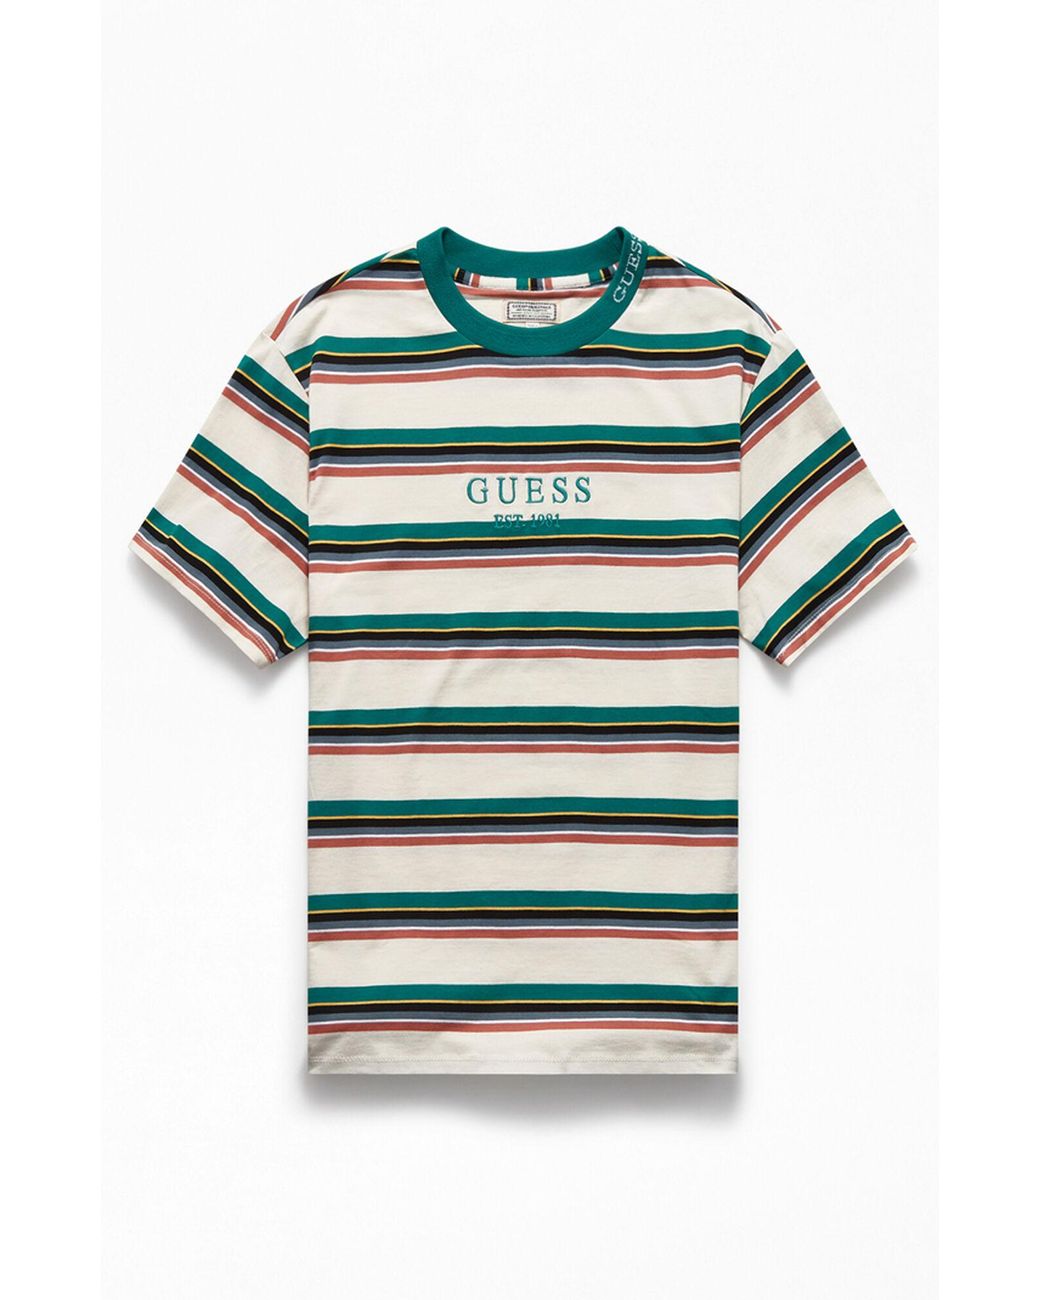 Guess Dylan Striped T-shirt in Green for Men - Lyst